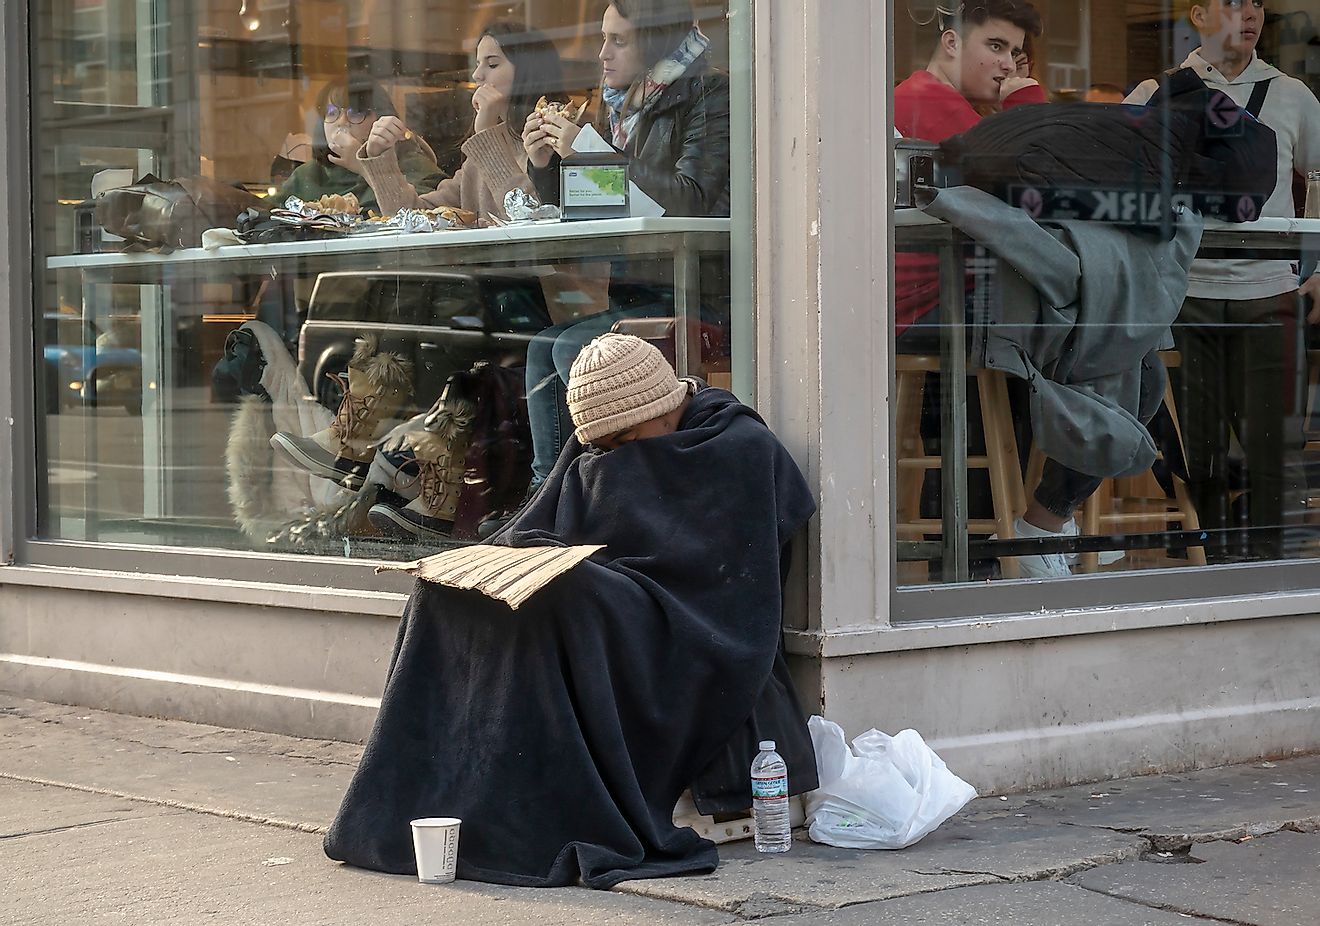 Homeless individual begs in front of a restaurant in the Chelsea neighborhood of New York. Image credit: Rblfmr/Shutterstock.com